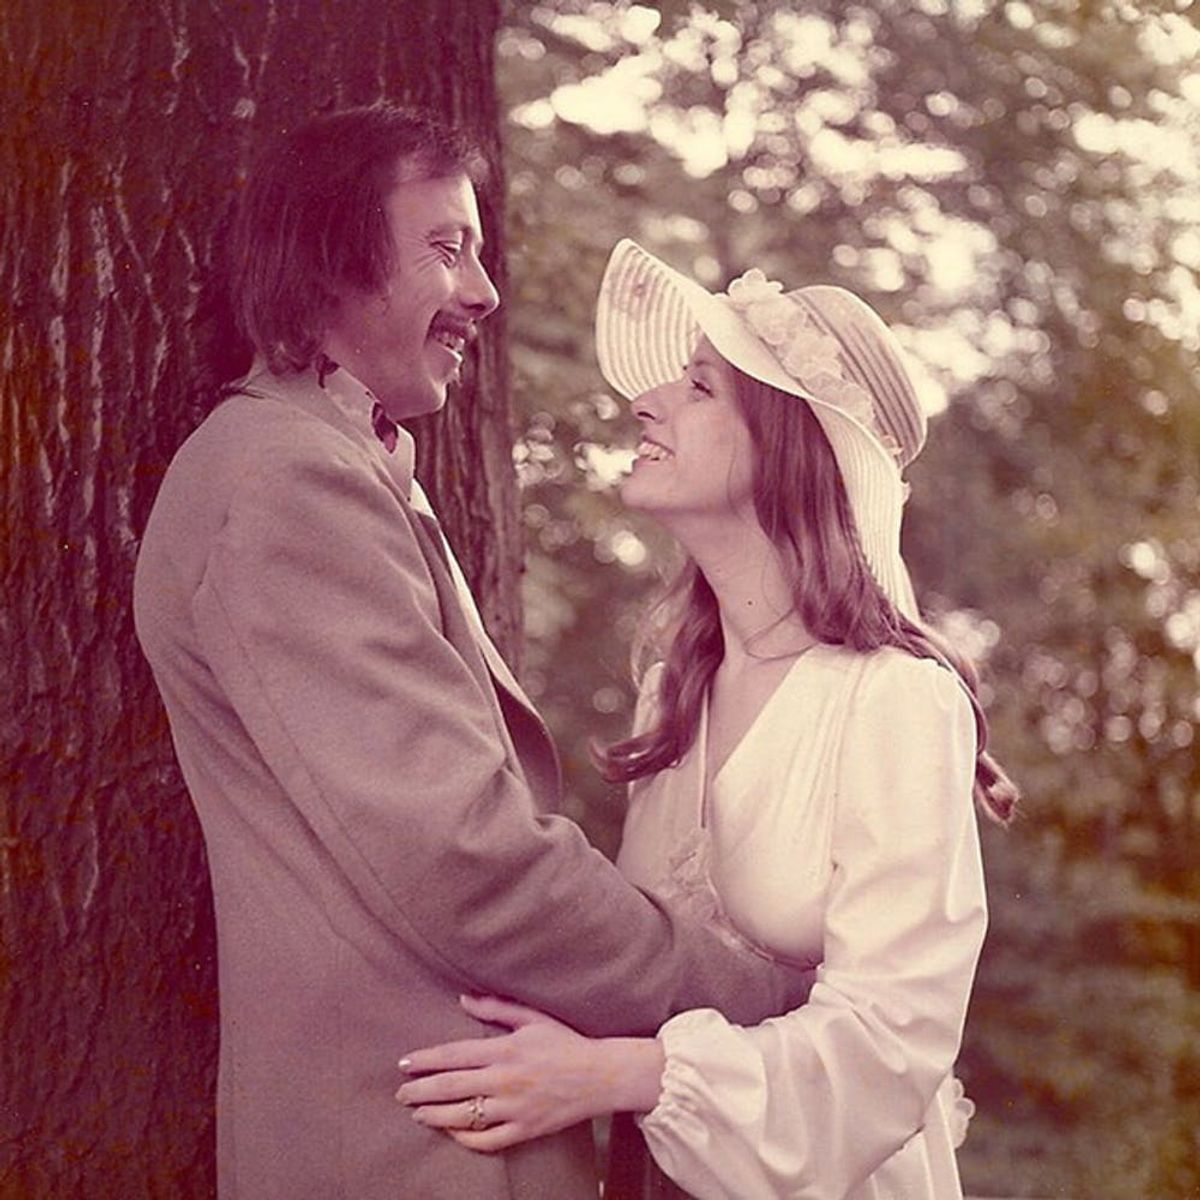 40 Years Later, This Couple Recreated Their Adorable Wedding Photos